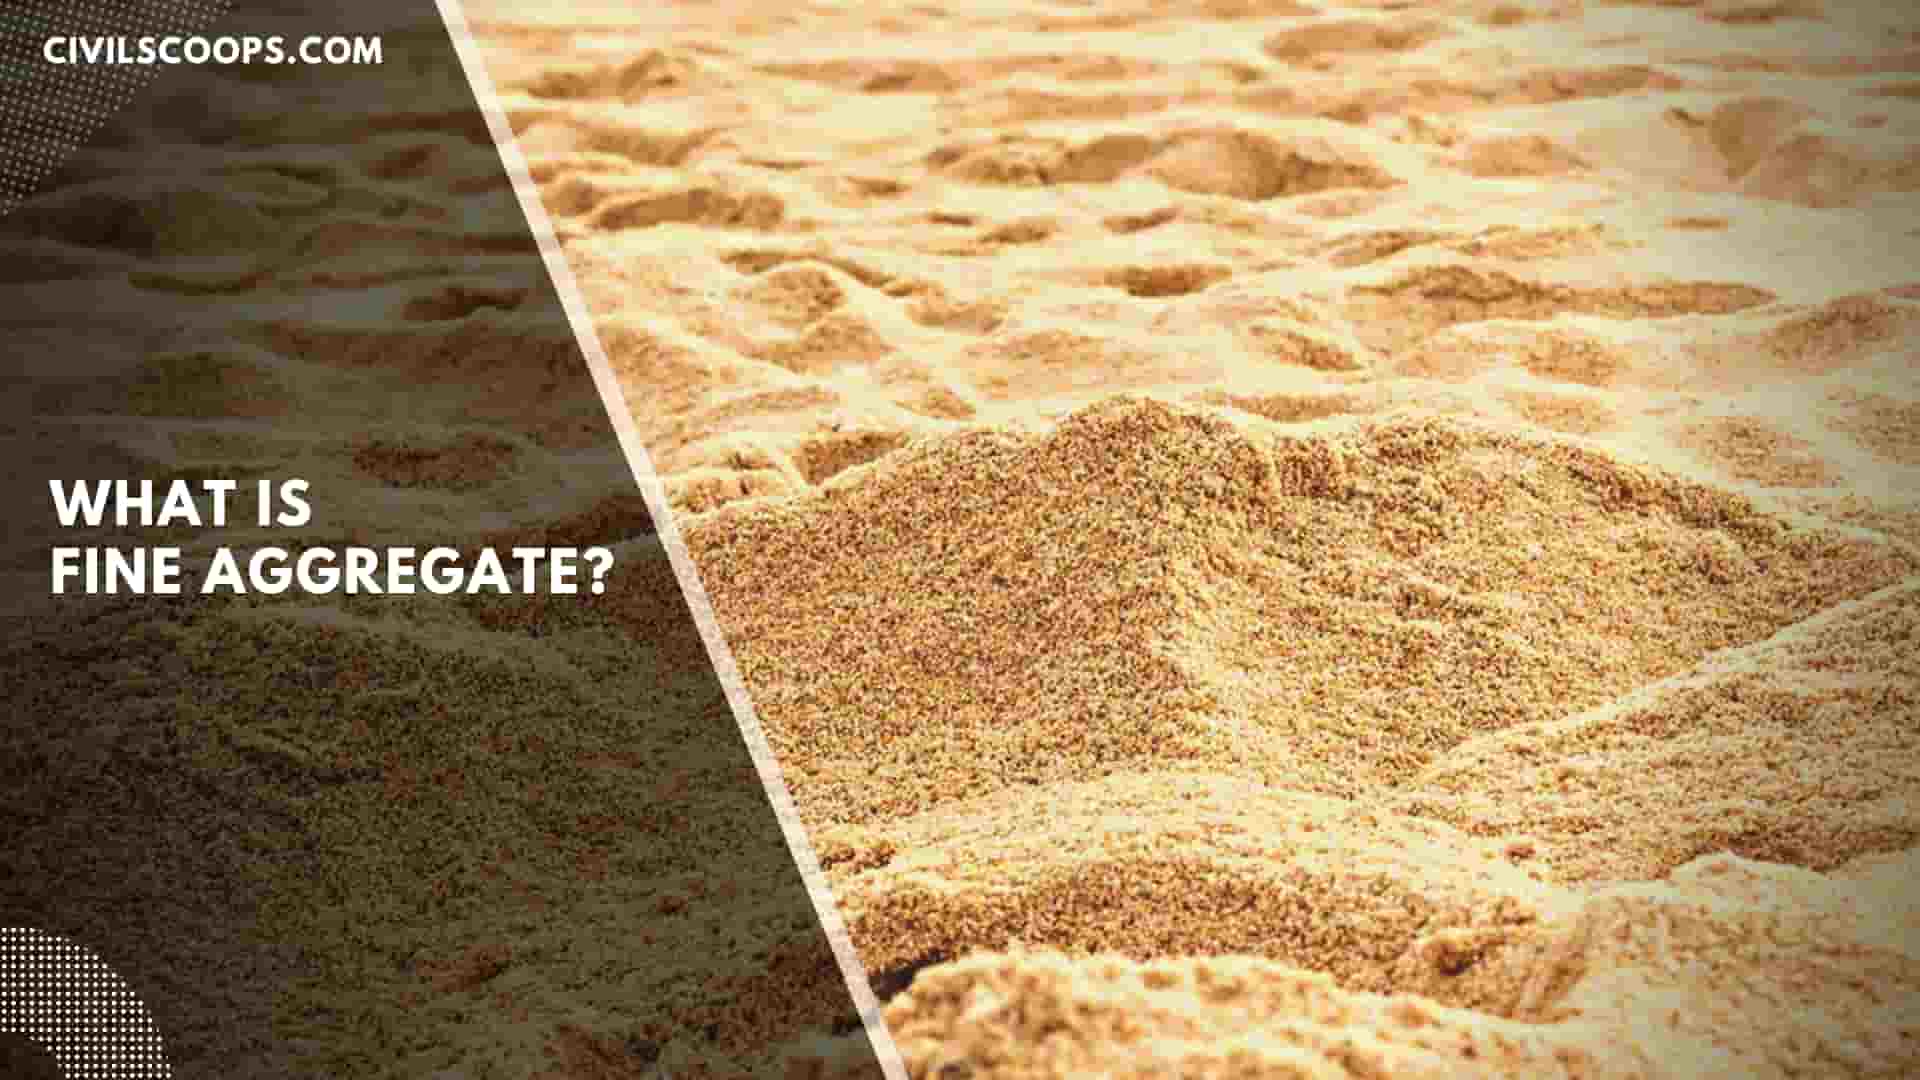 What Is Fine Aggregate?